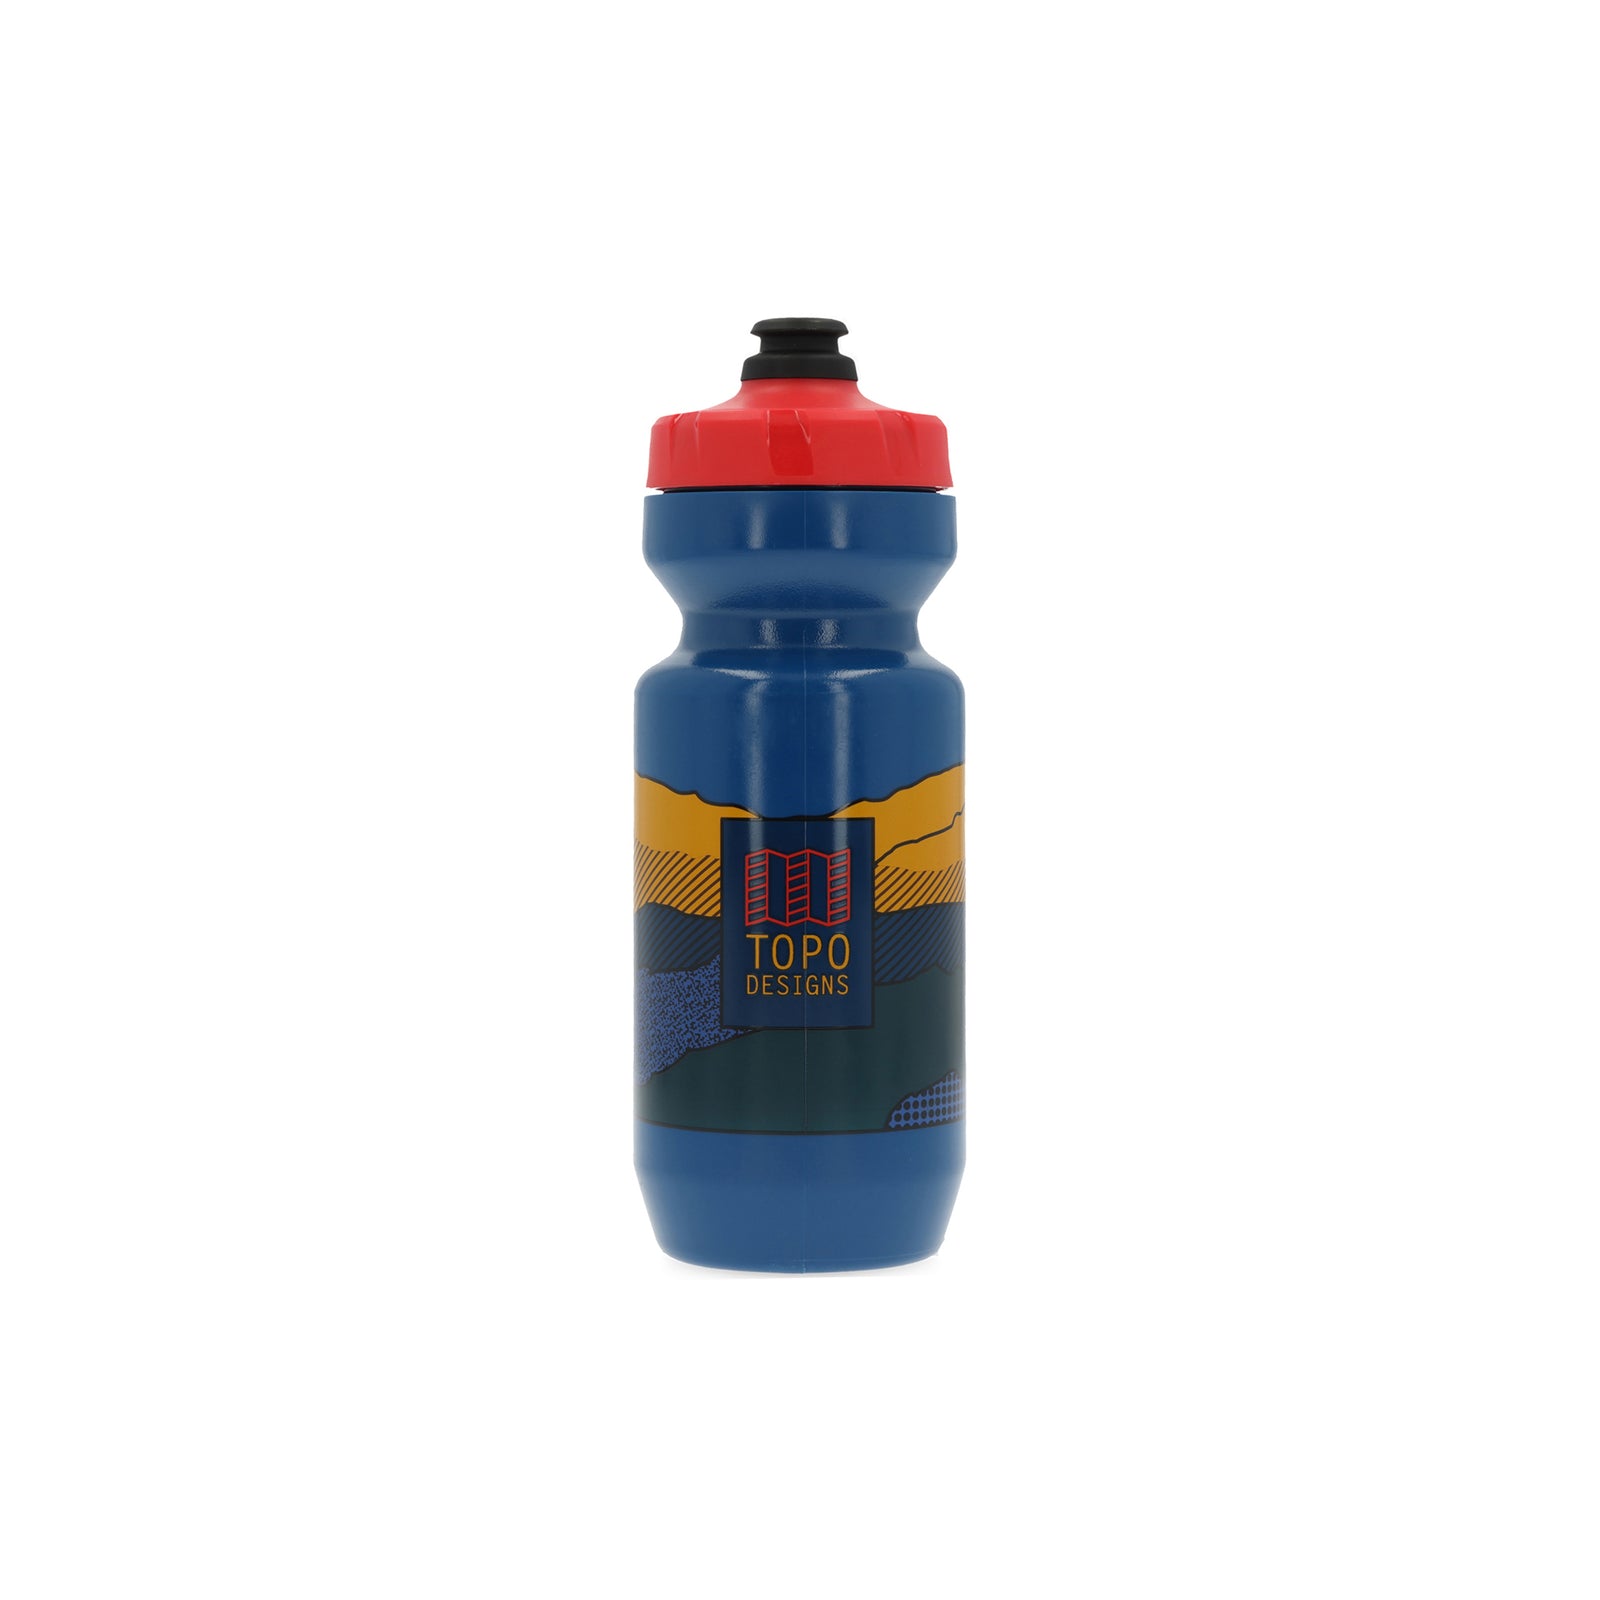 Topo Designs x Specialized Purist 22oz cycling Water Bottle in "Tide" blue.